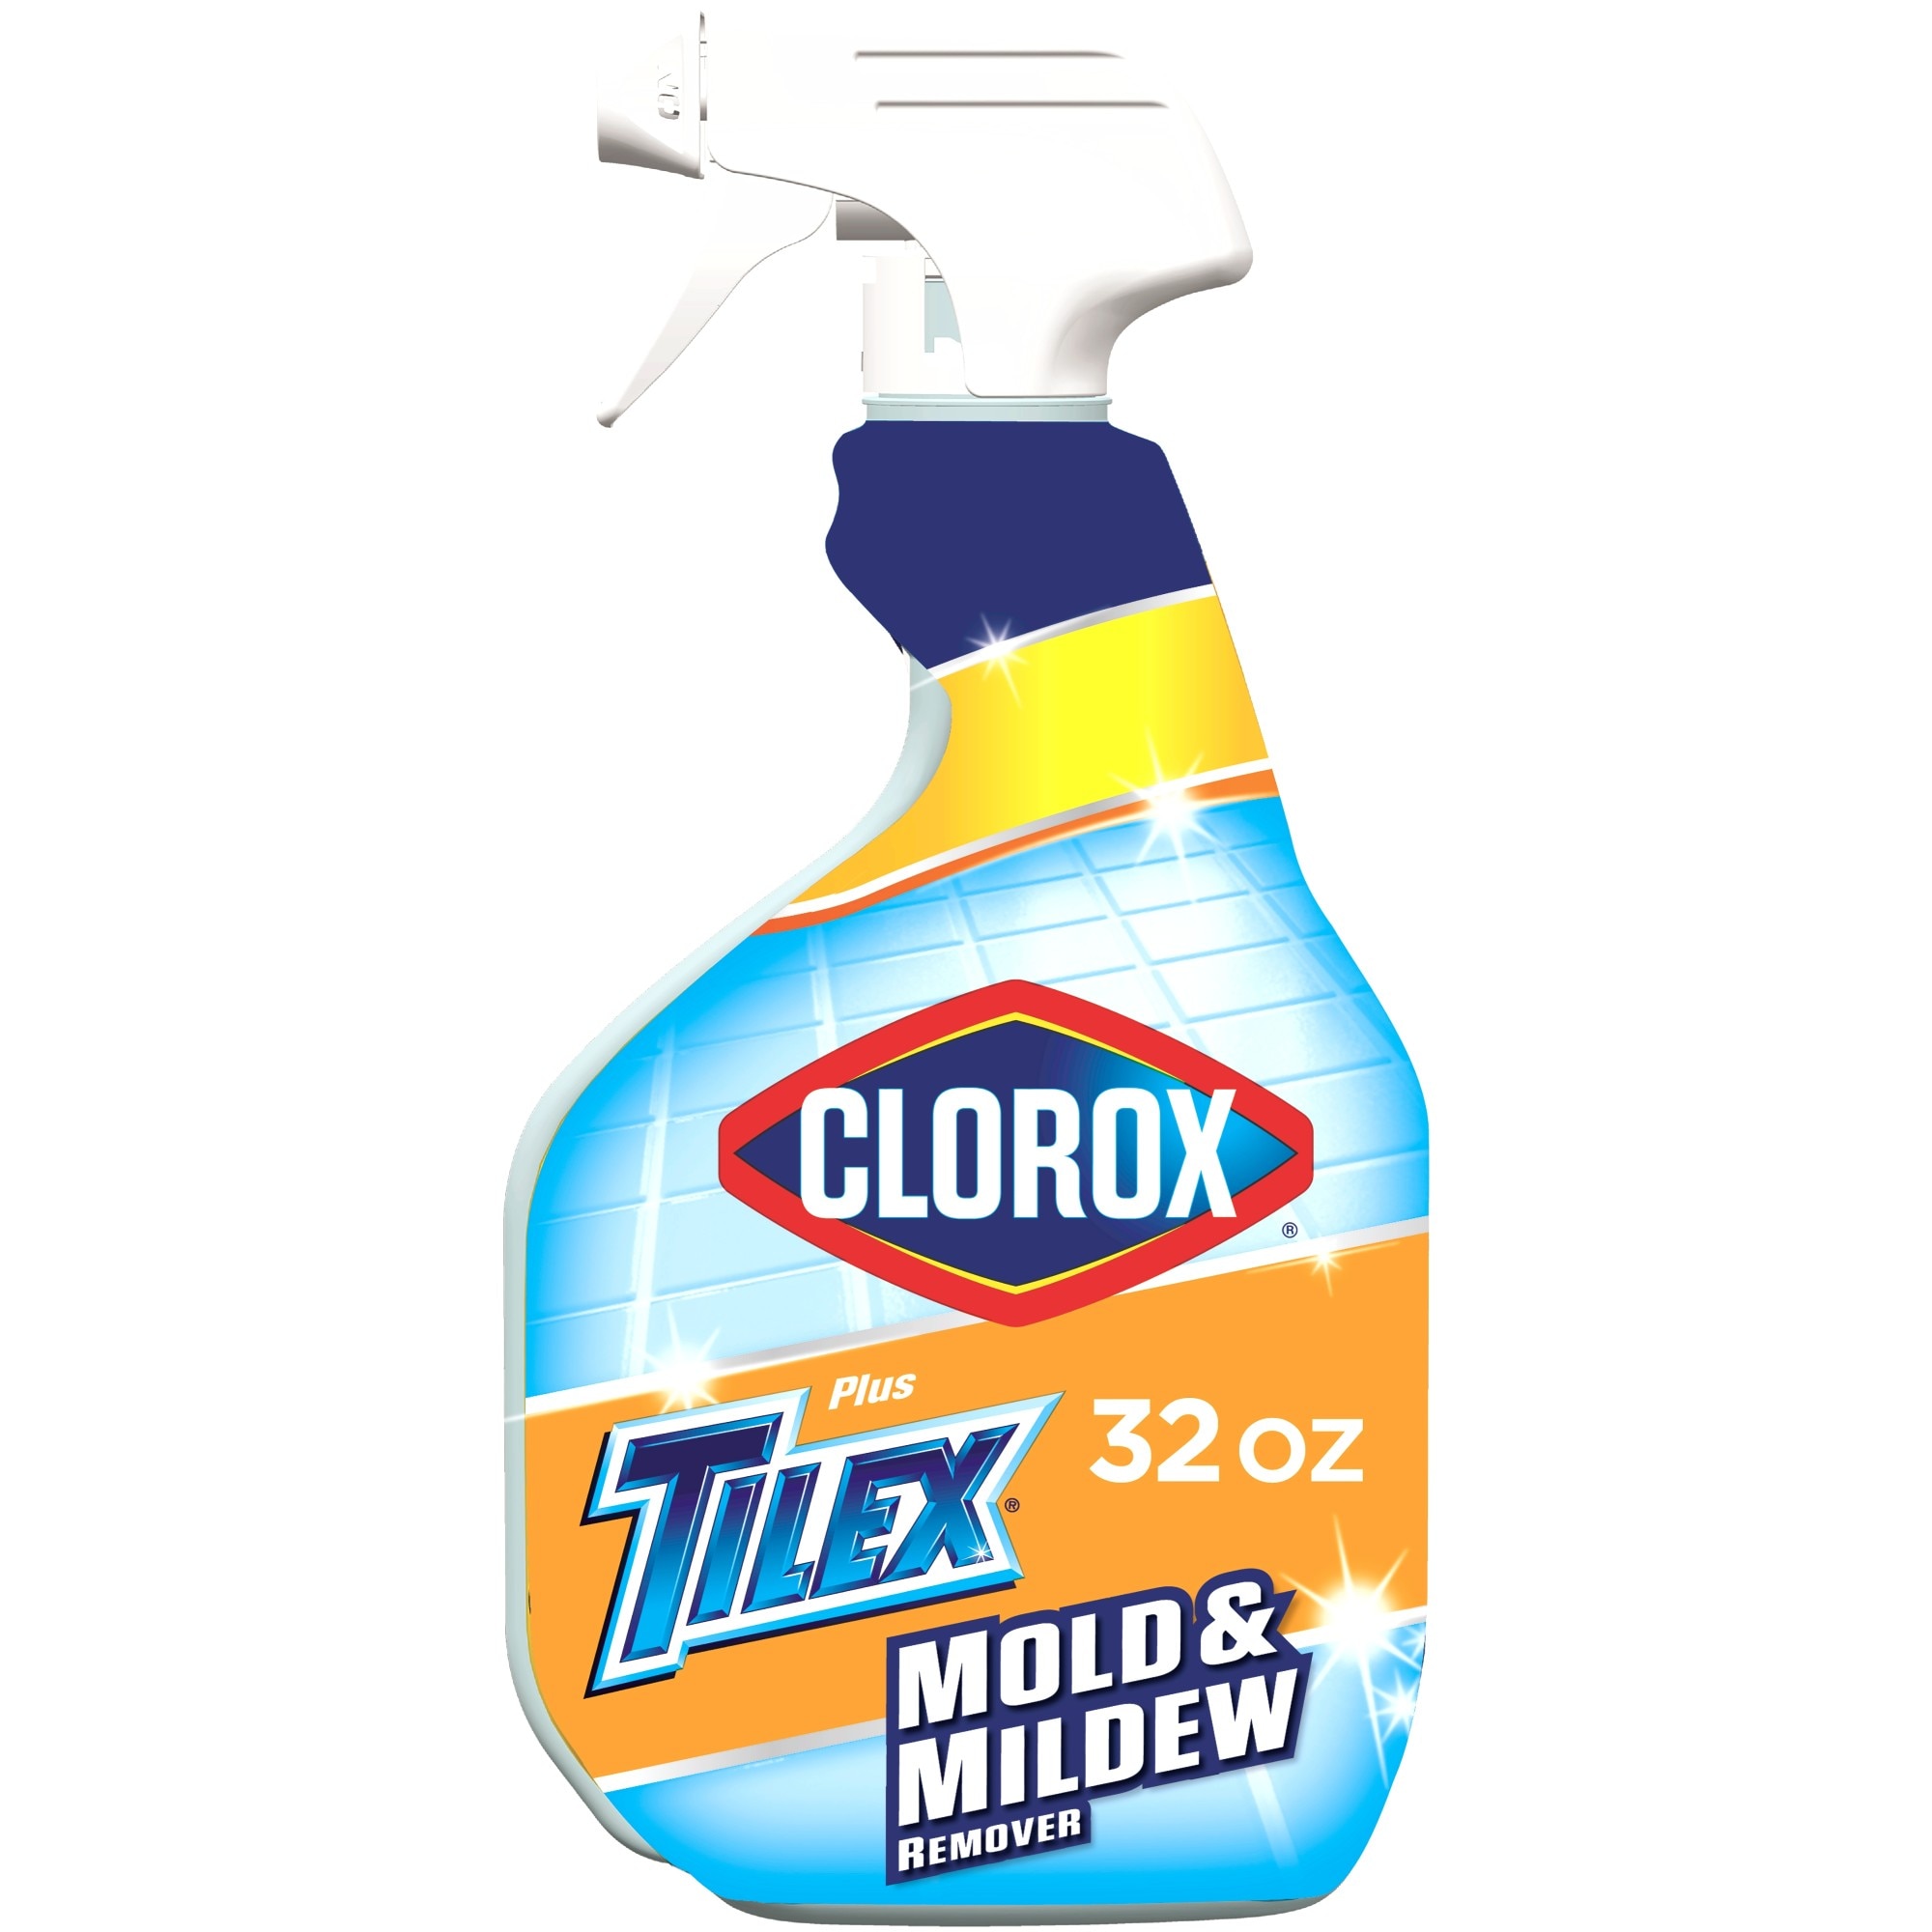 Clorox Nylon Stiff Tile and Grout Brush in the Tile & Grout